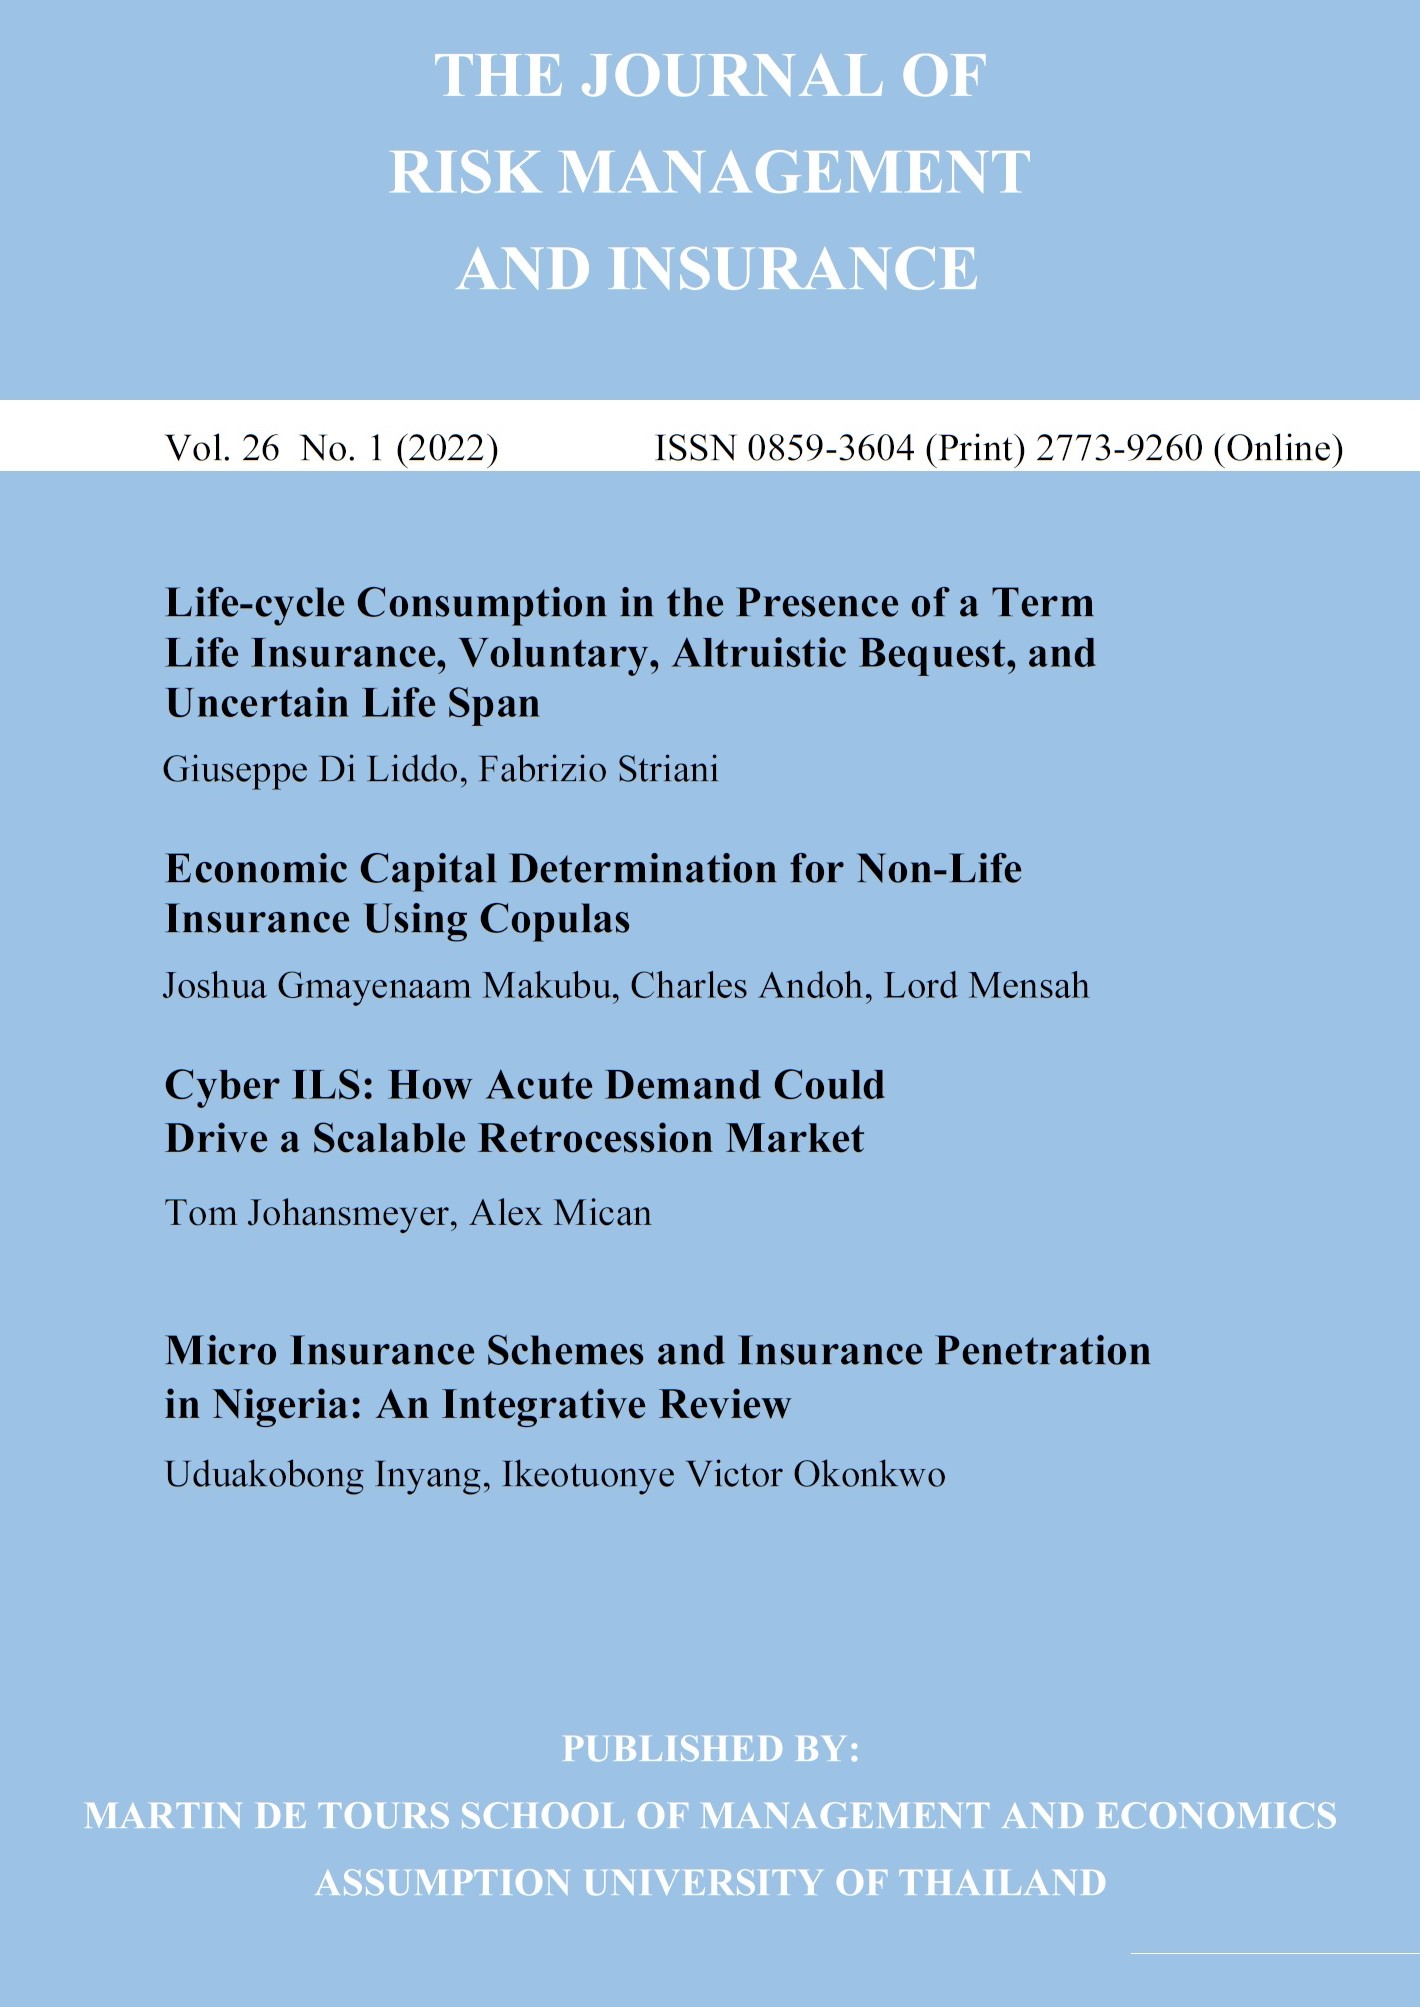 					View Vol. 26 No. 1 (2022): The Journal of Risk Management and Insurance
				